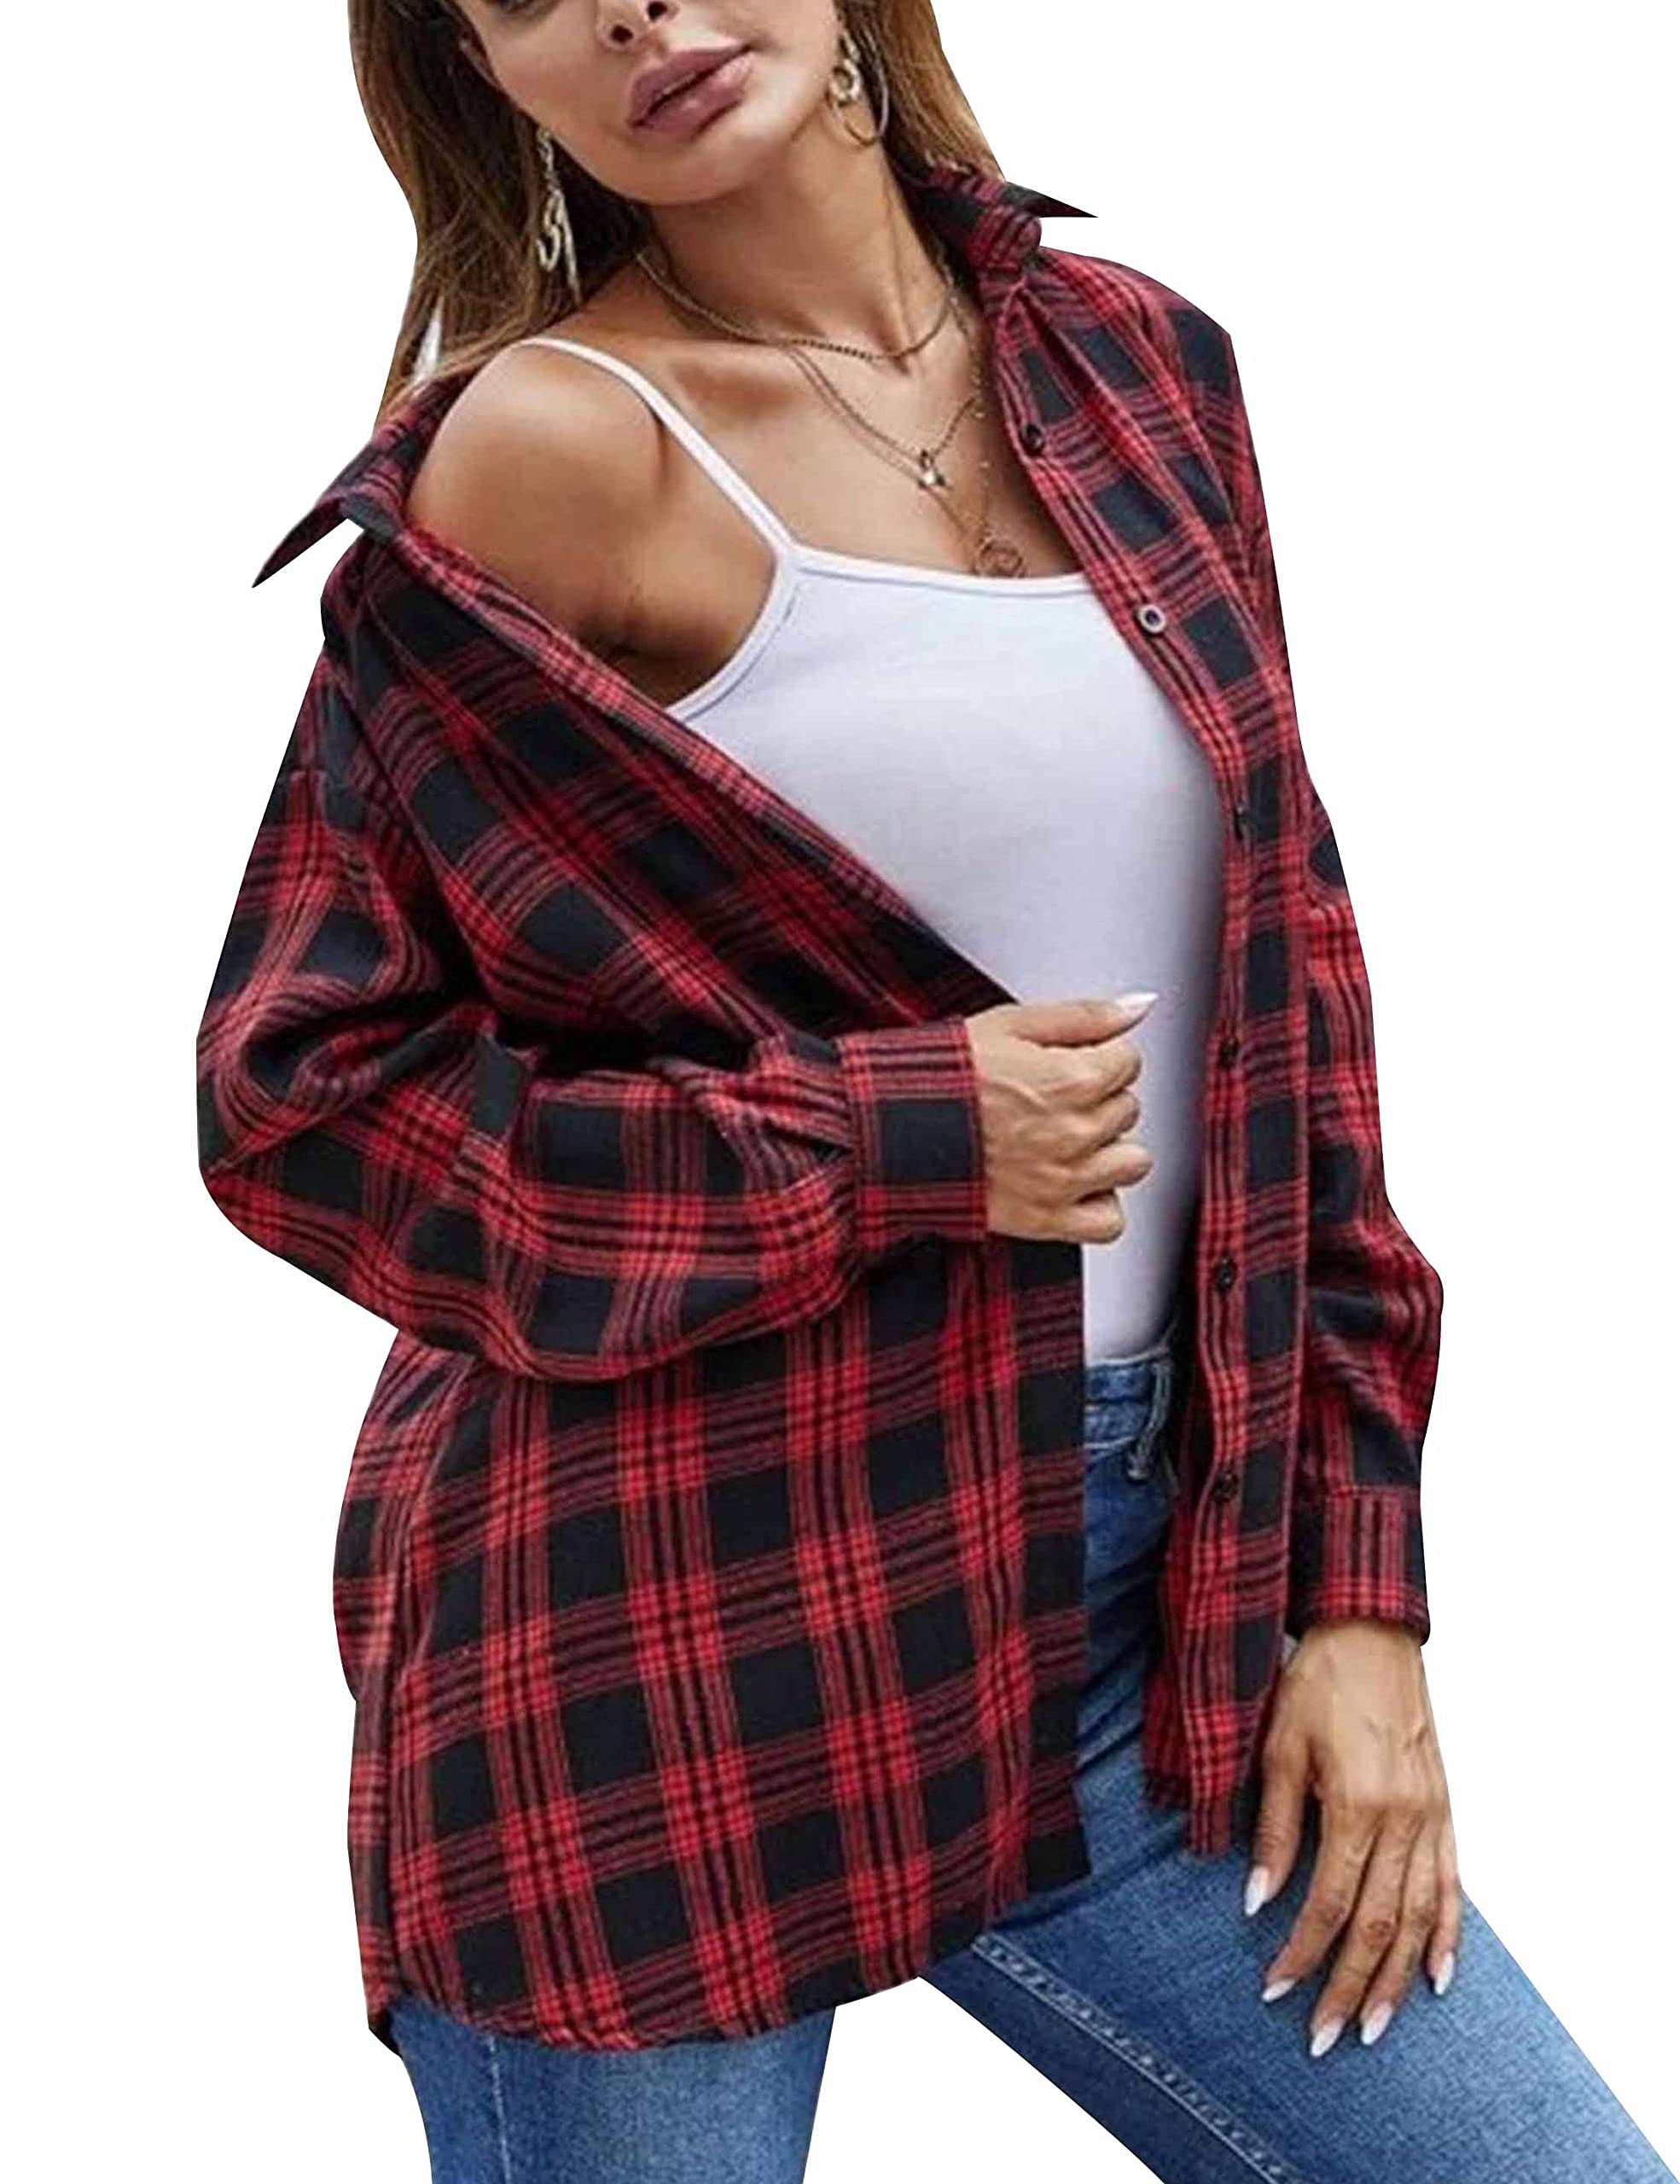 HangNiFang Black and Red Flannel Shirt for Women Oversized Plaid Shirts Long Sleeve Button Down Shirts Blouse(0368-Red-XXL)